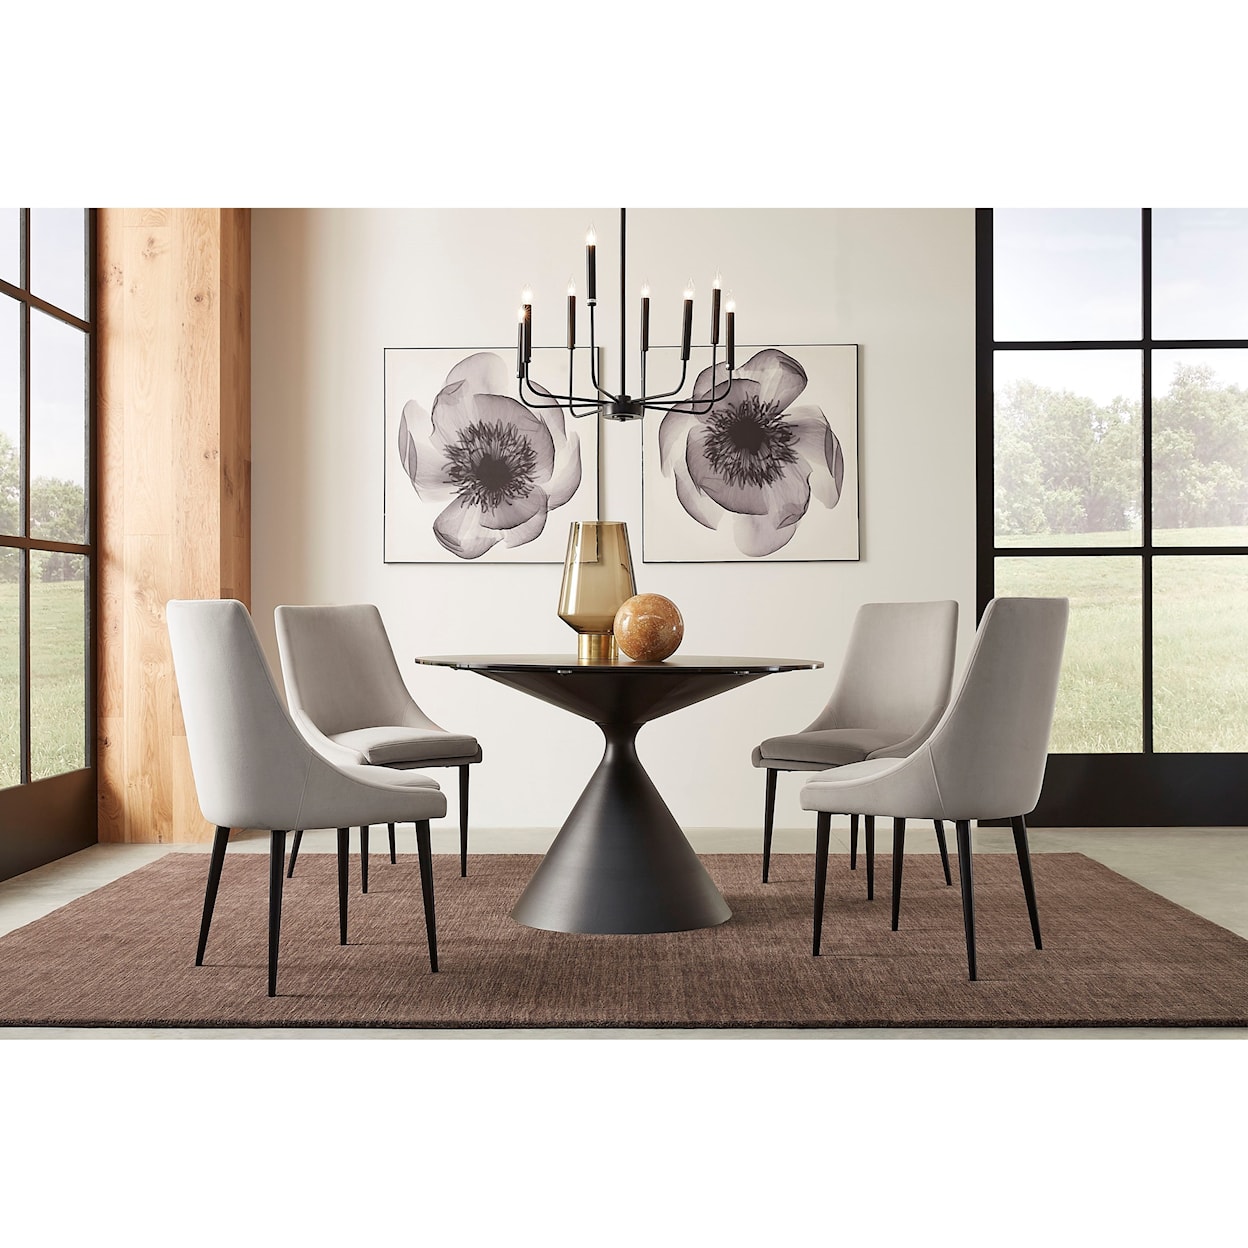 Modus International Winston 5-Piece Table and Chair Set